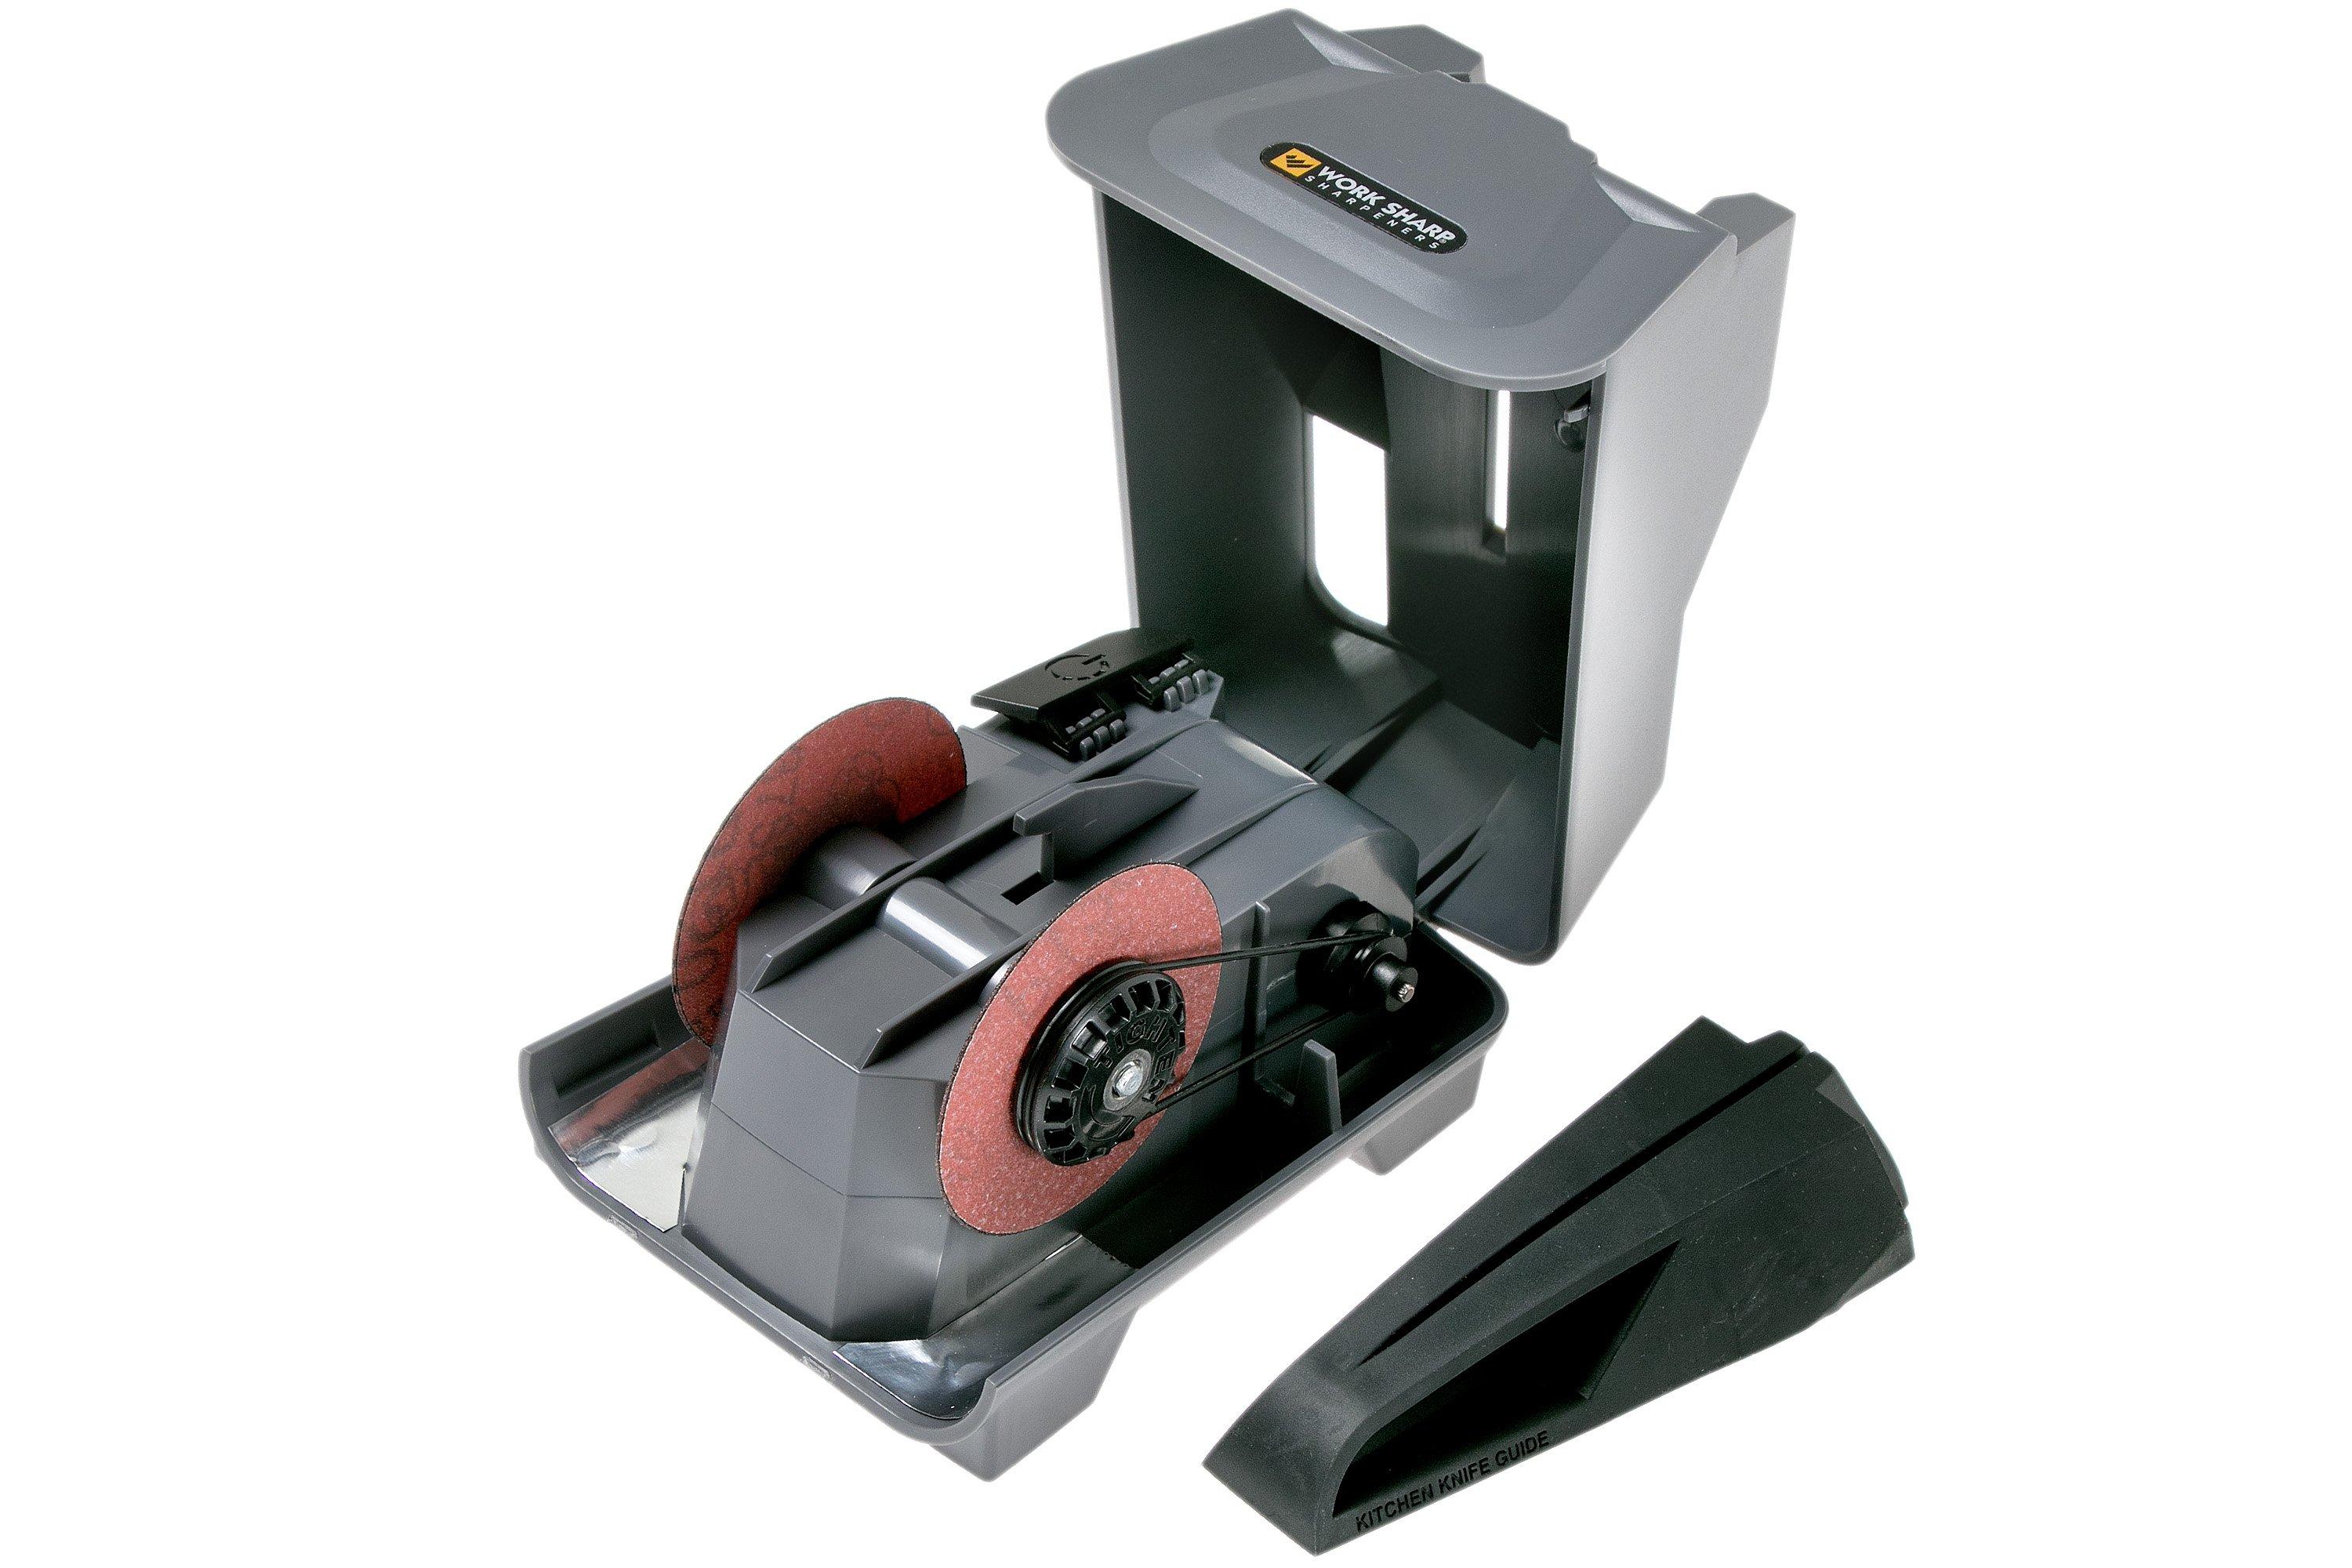 Work Sharp Culinary E2 Plus Electric Kitchen Knife Sharpener - KnifeCenter  - CPE2P - Discontinued